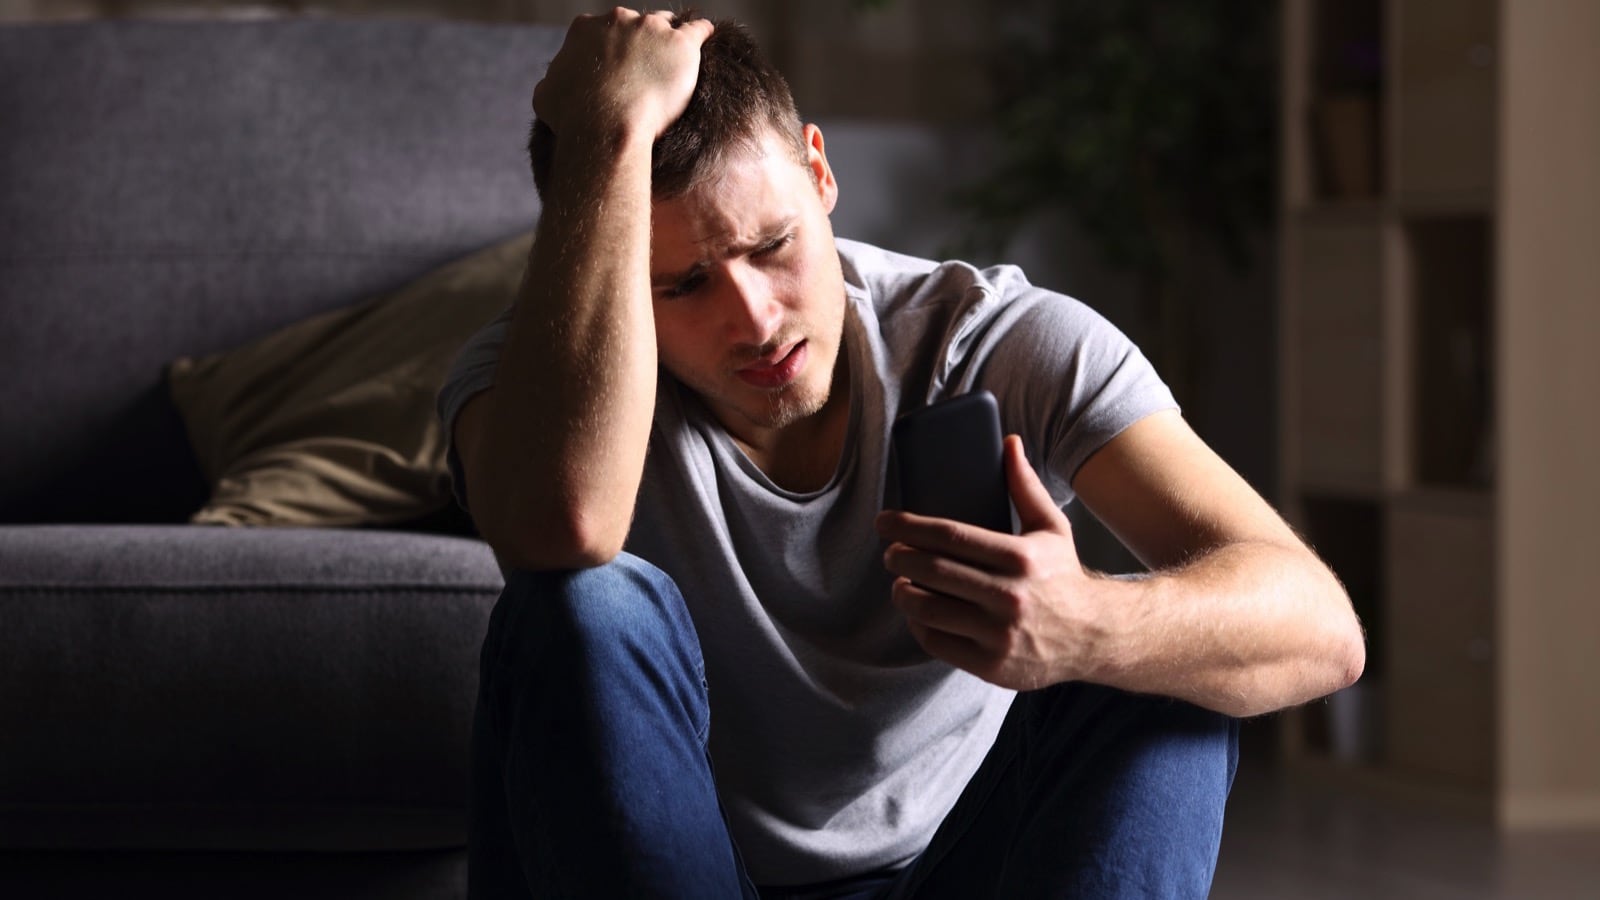 Stressed man checking mobile